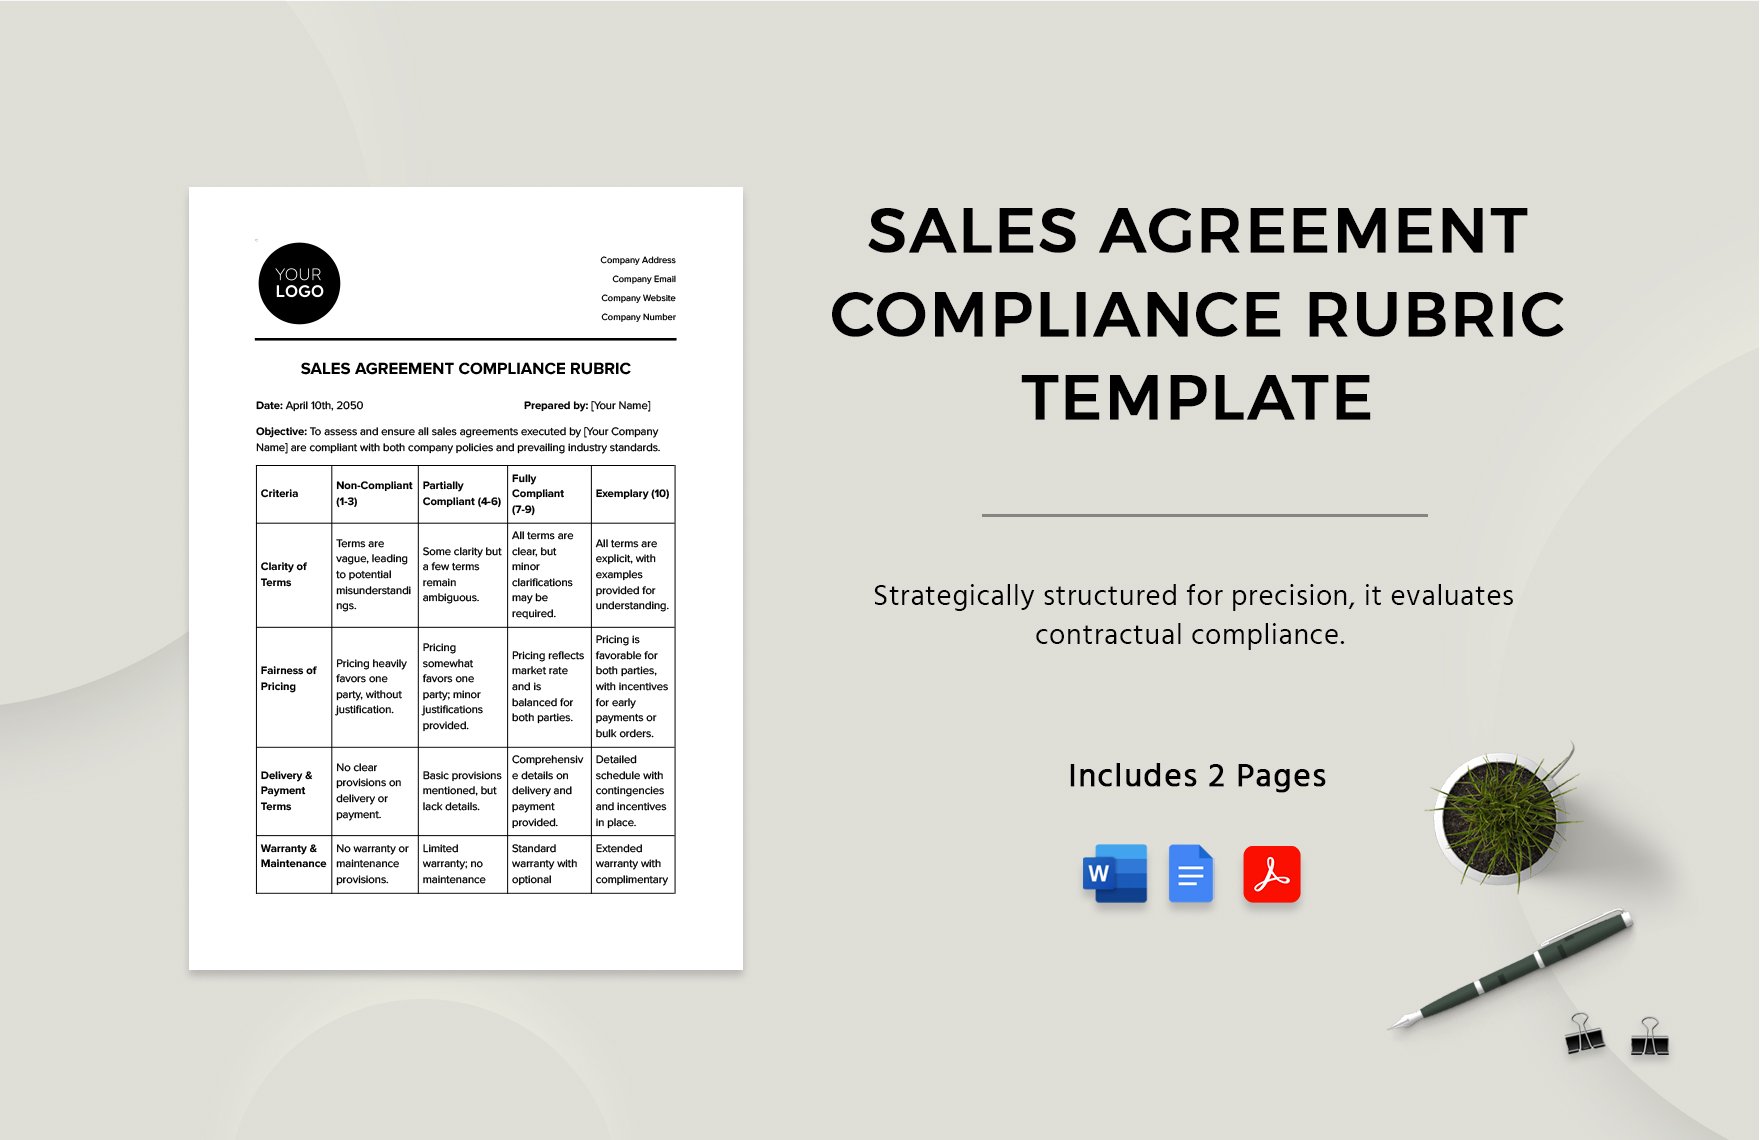 Sales Agreement Compliance Rubric Template